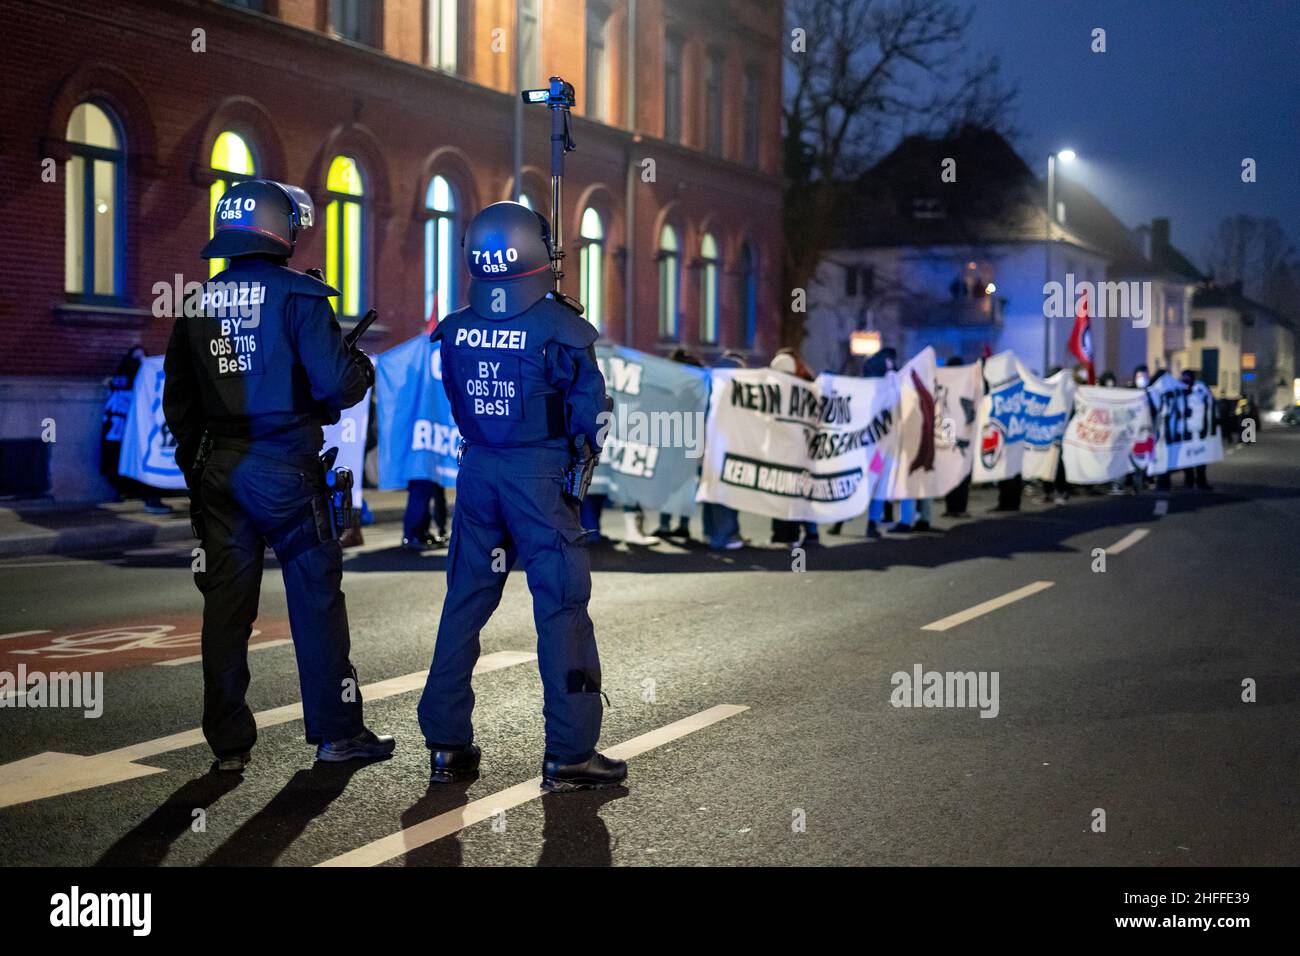 On January 15, 2022 a few hundreds antifascists gathered in Rosenheim, southern Germany to protest against the AfD bureau of Andreas Winhart and Franz-Xaver Bergmueller. The protestors lit pyrotechnics. (Photo by Alexander Pohl/Sipa USA) Stock Photo